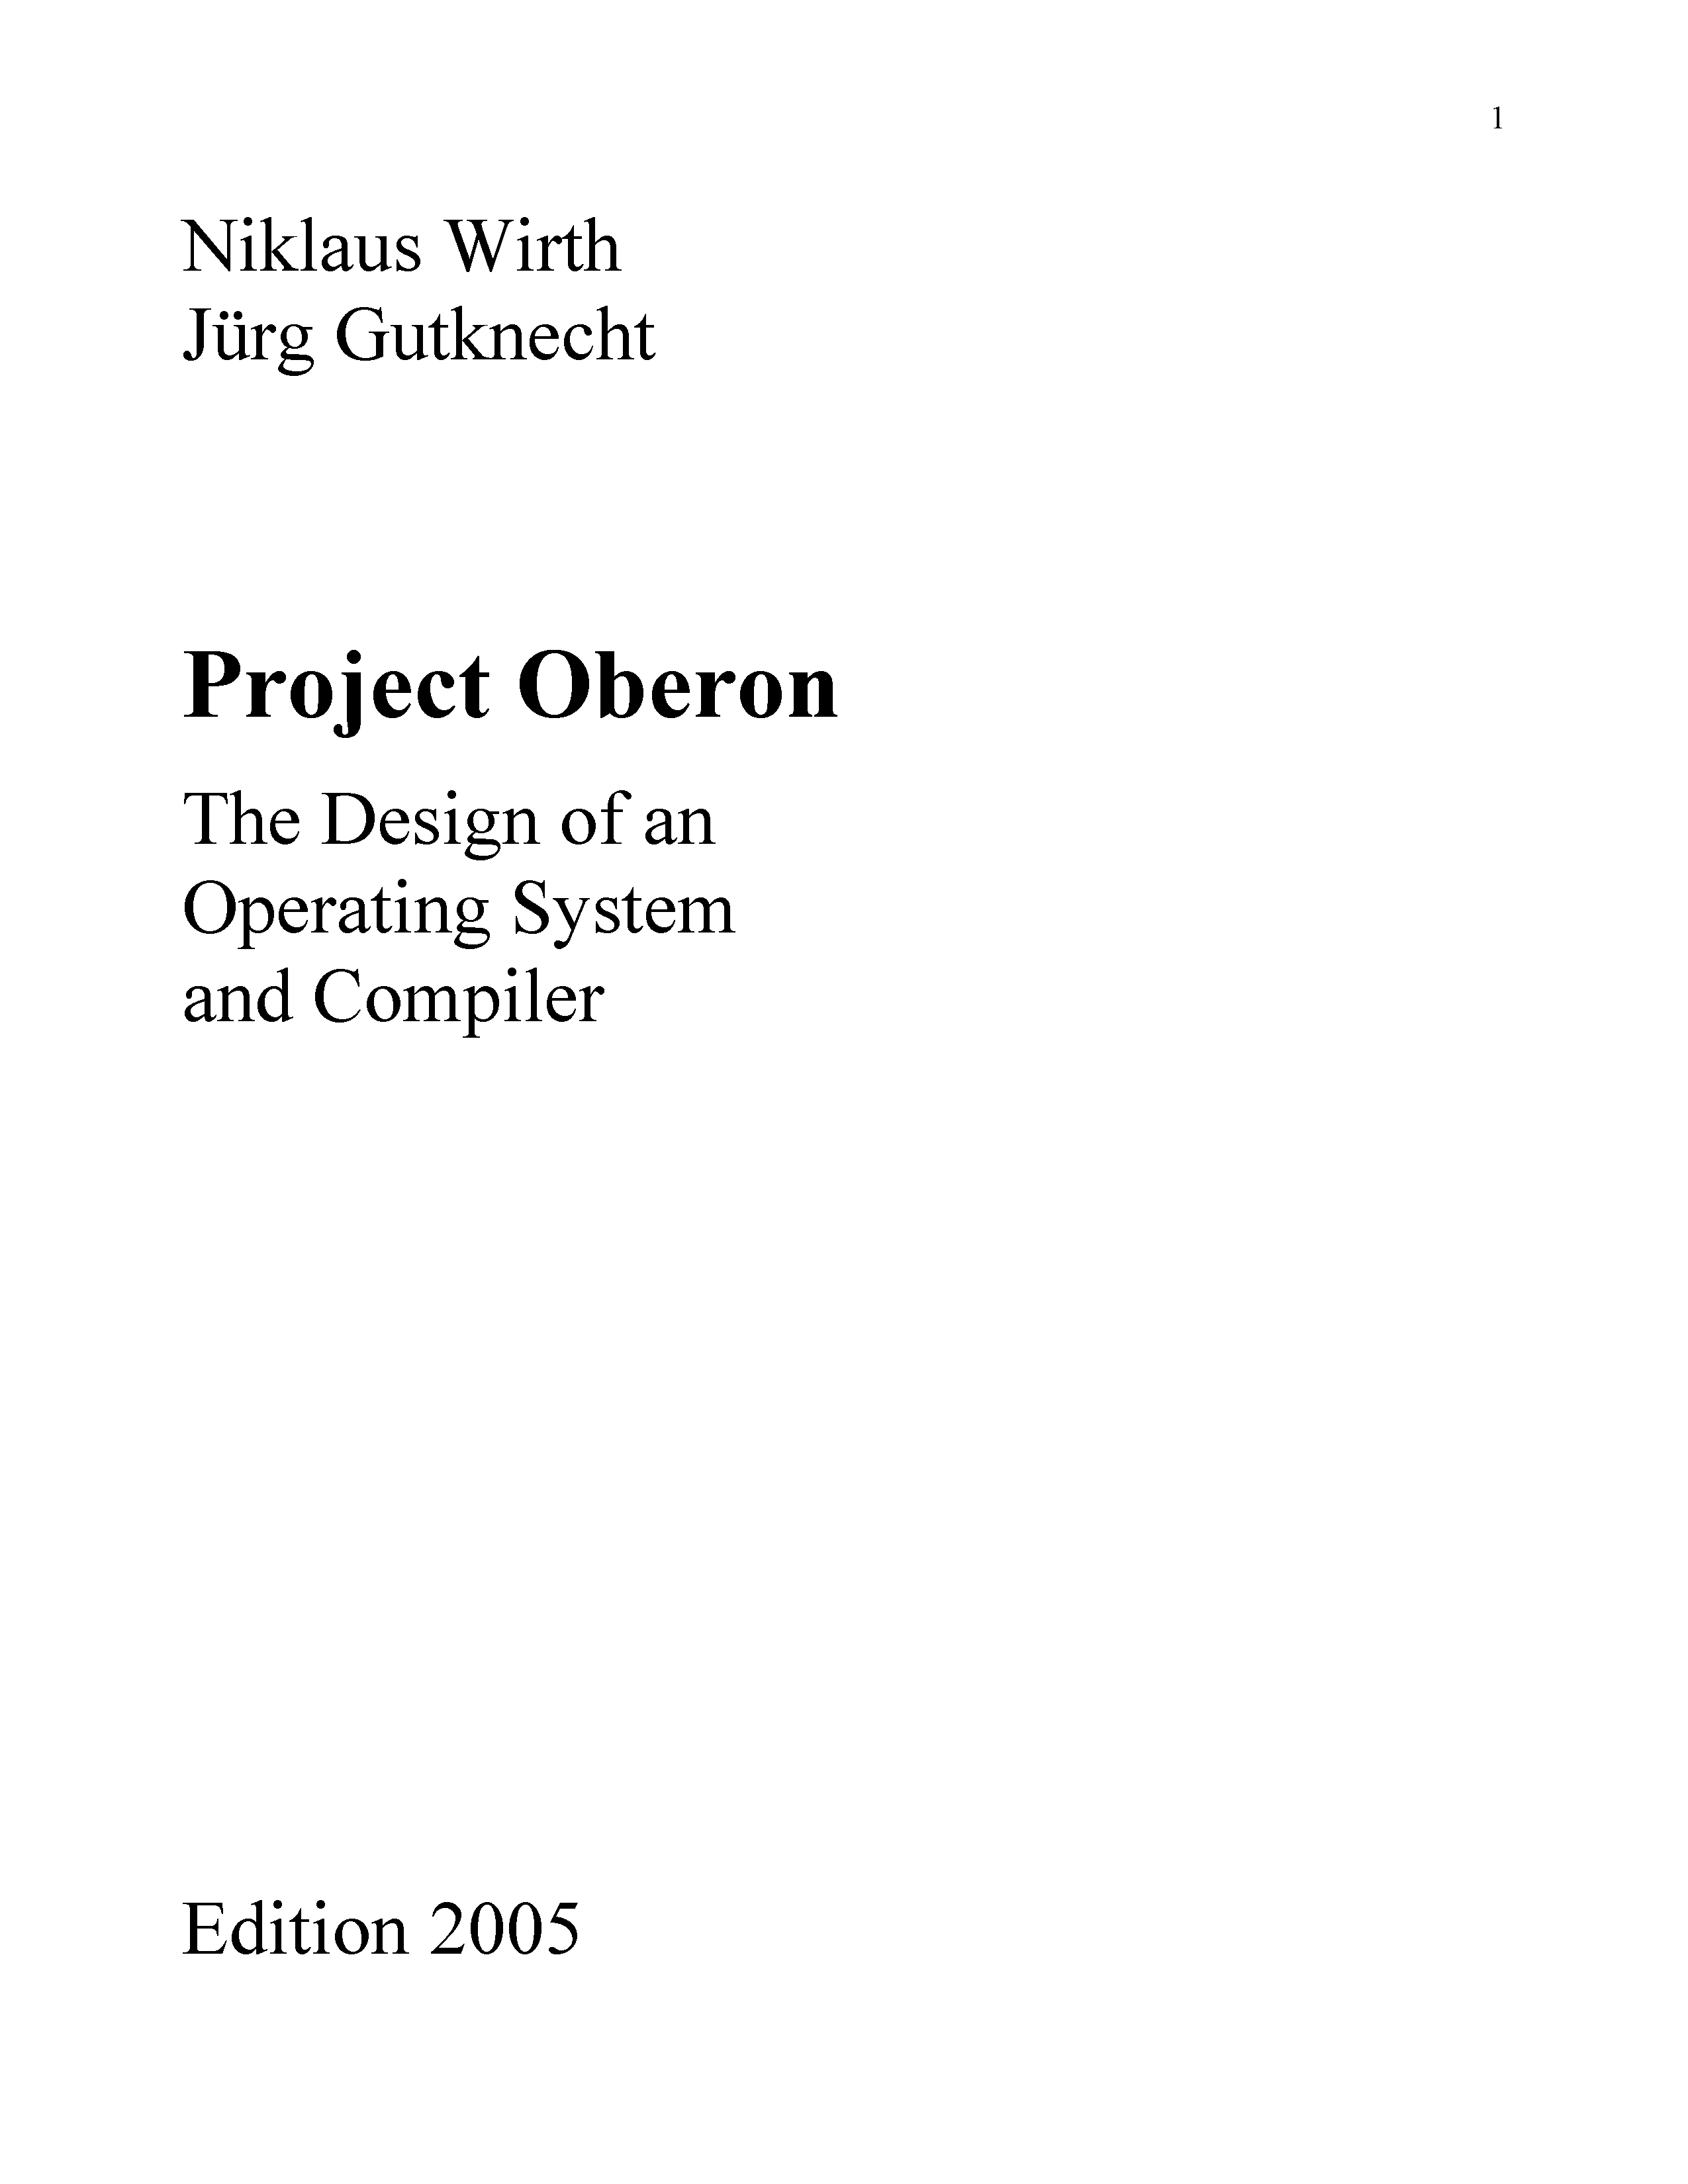 Project Oberon - The Design of an Operating System and Compiler, Revised Edition 2013